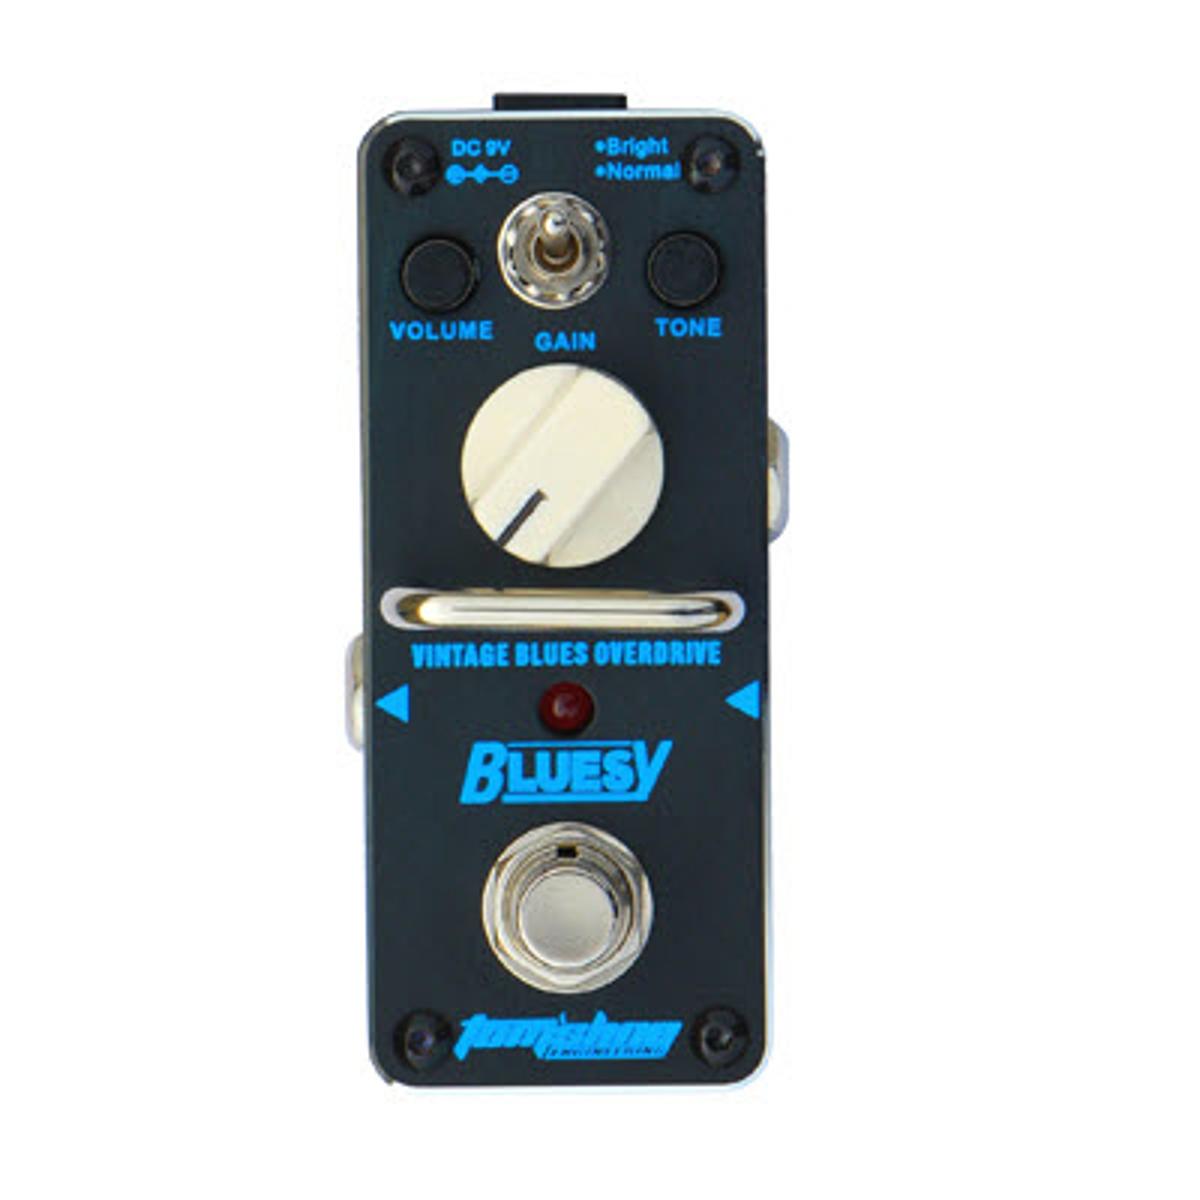 Toms Line ABY-3 Bluesy Vintage Blues Overdrive Mini Effects Pedal